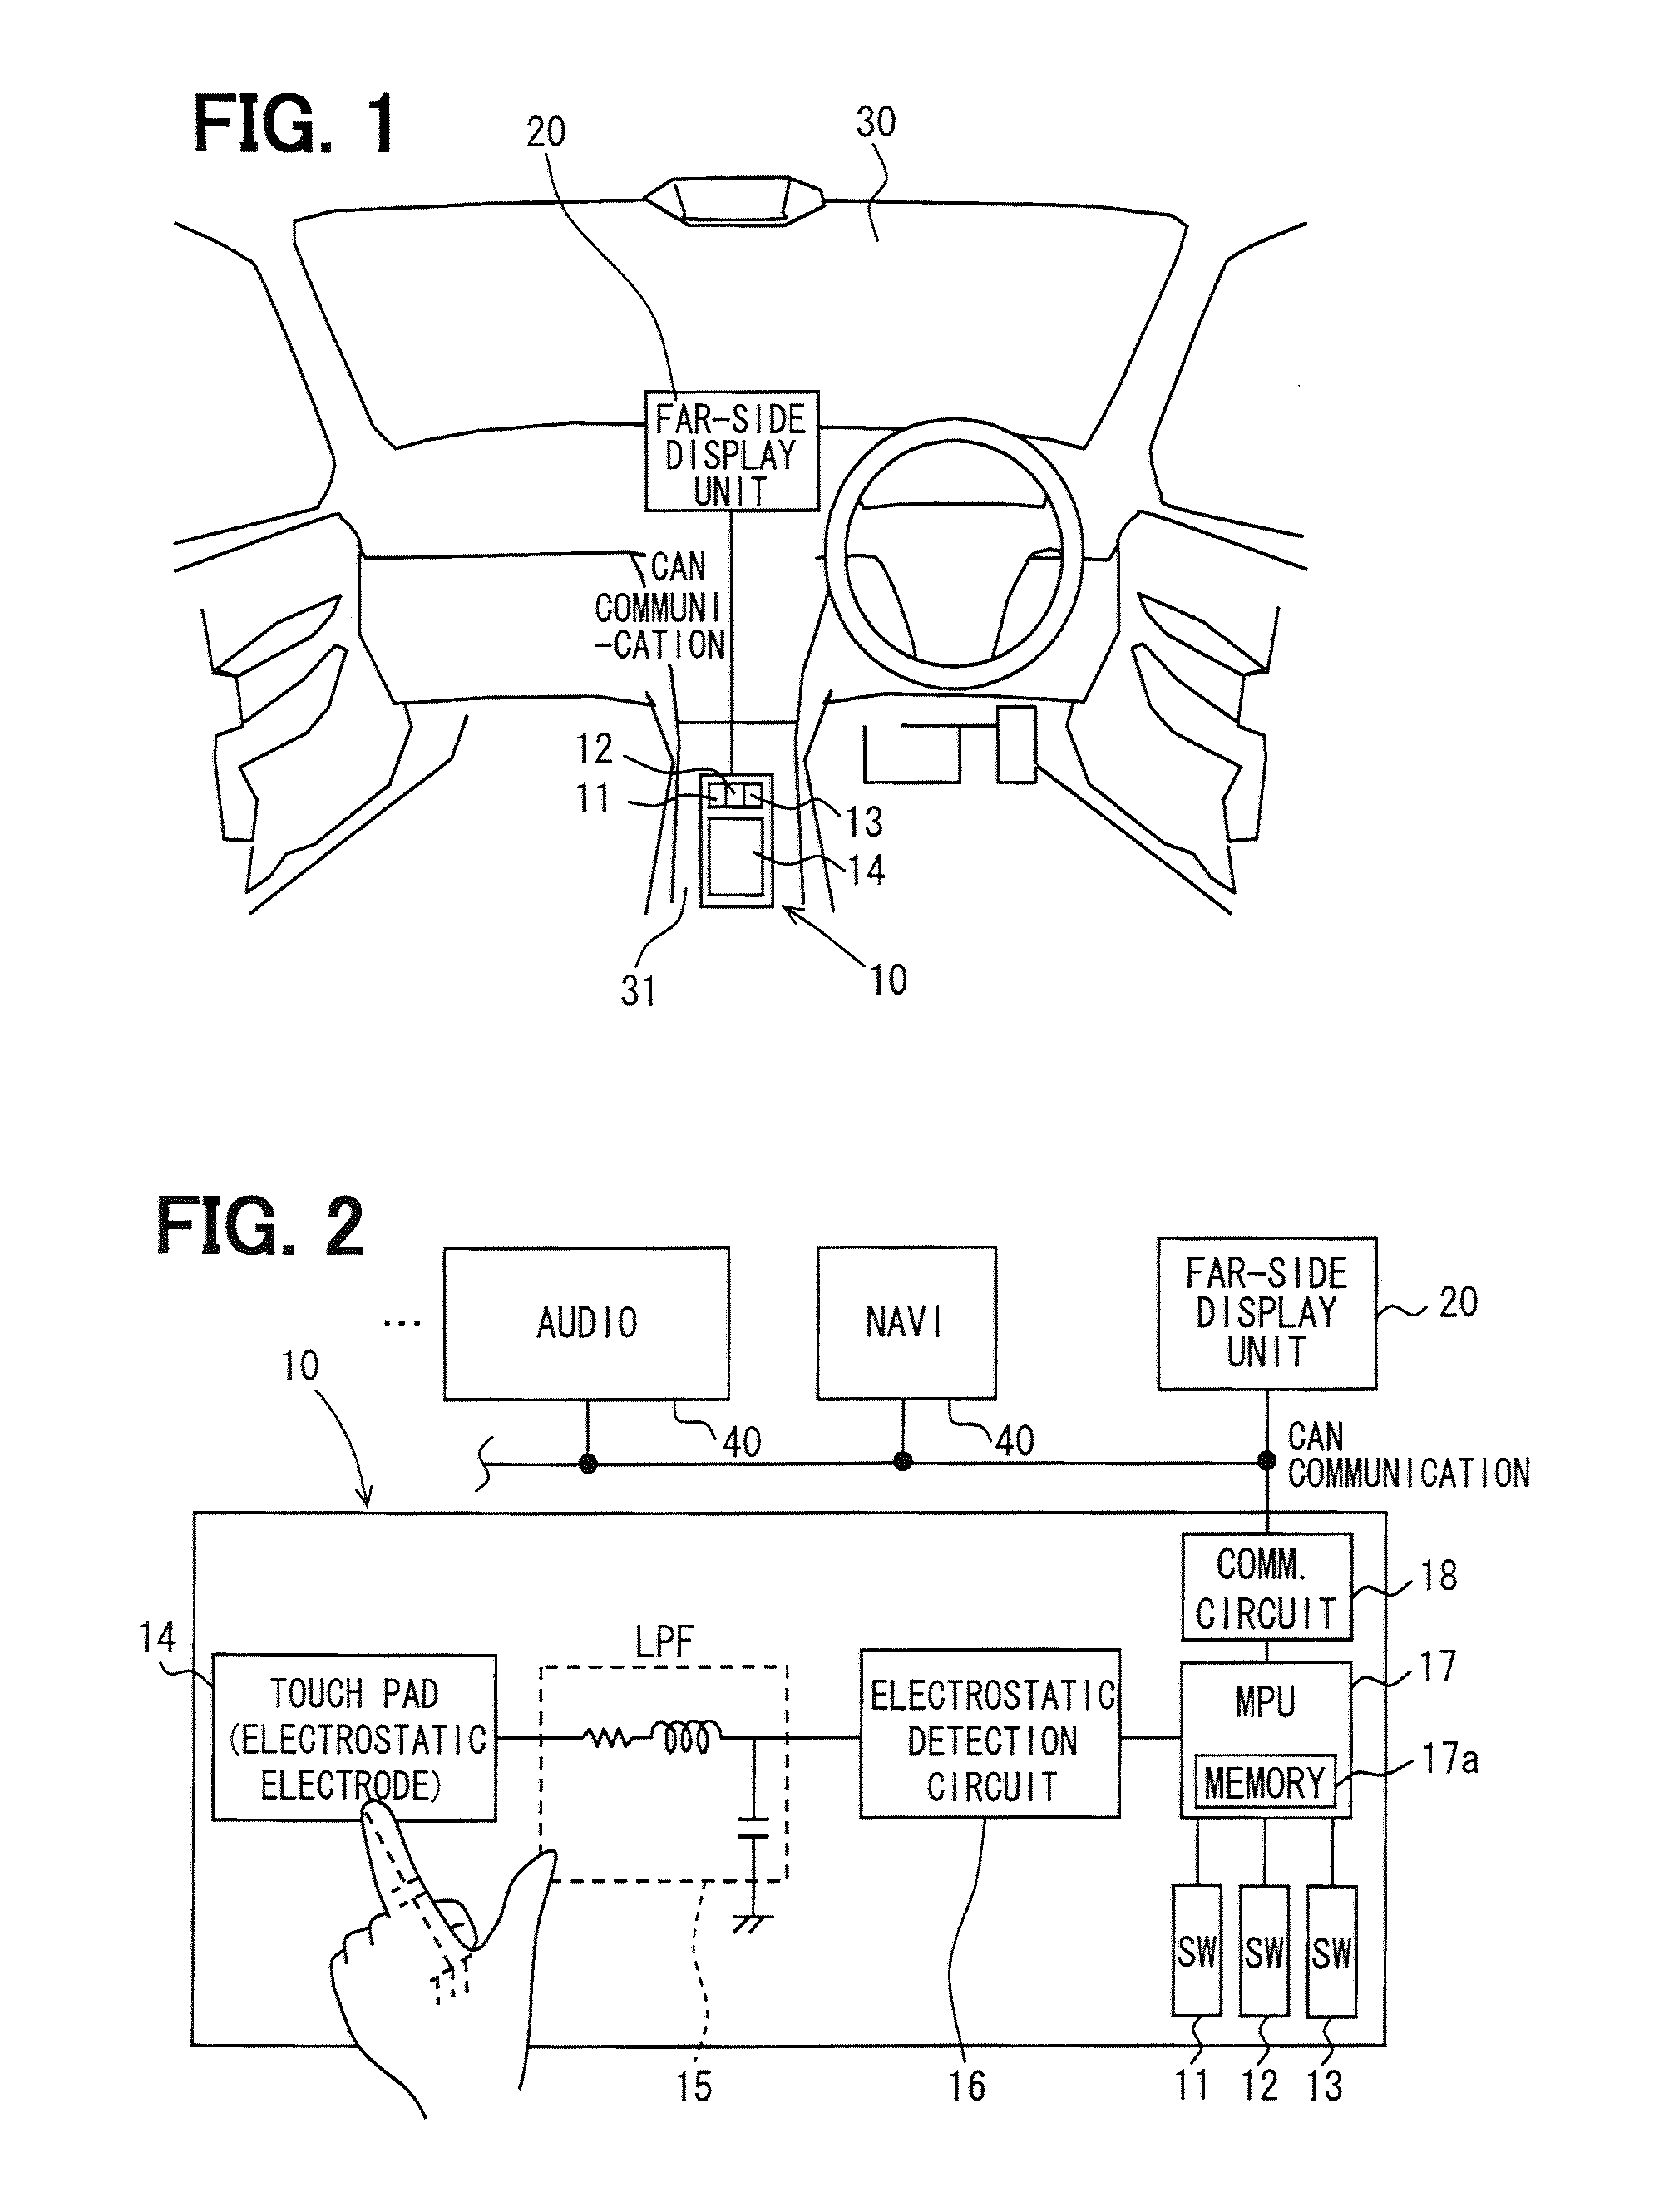 In-vehicle operation apparatus